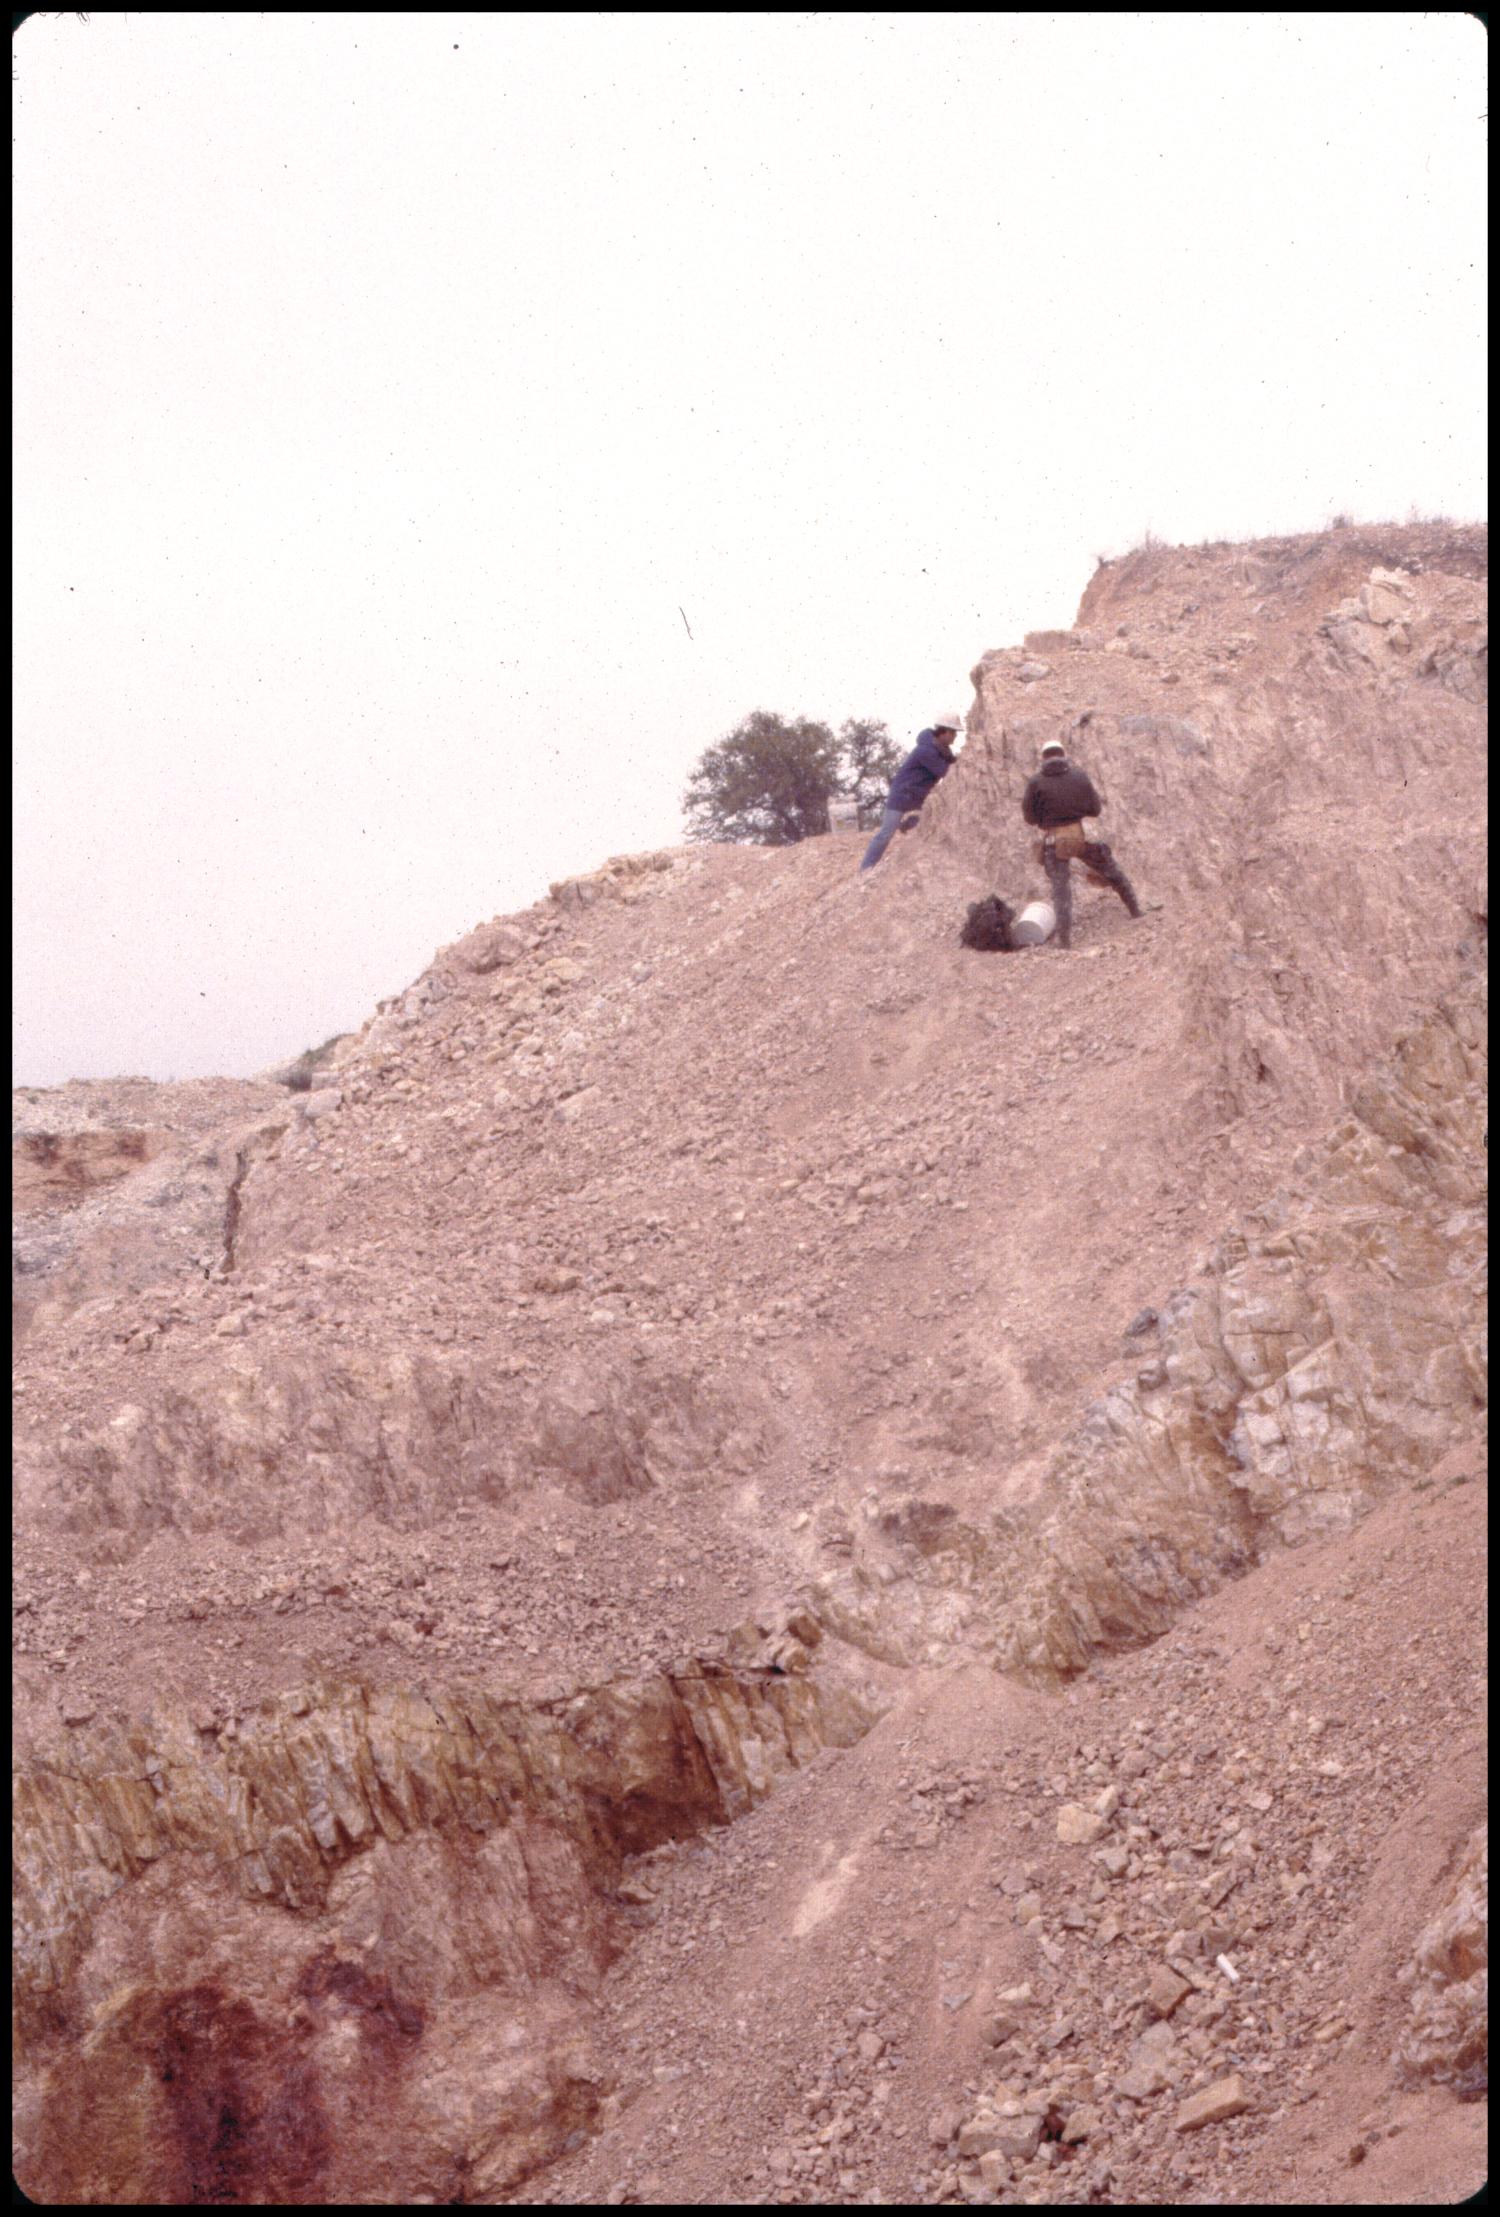 [Two Hikers in Badu Quarry]
                                                
                                                    [Sequence #]: 1 of 1
                                                